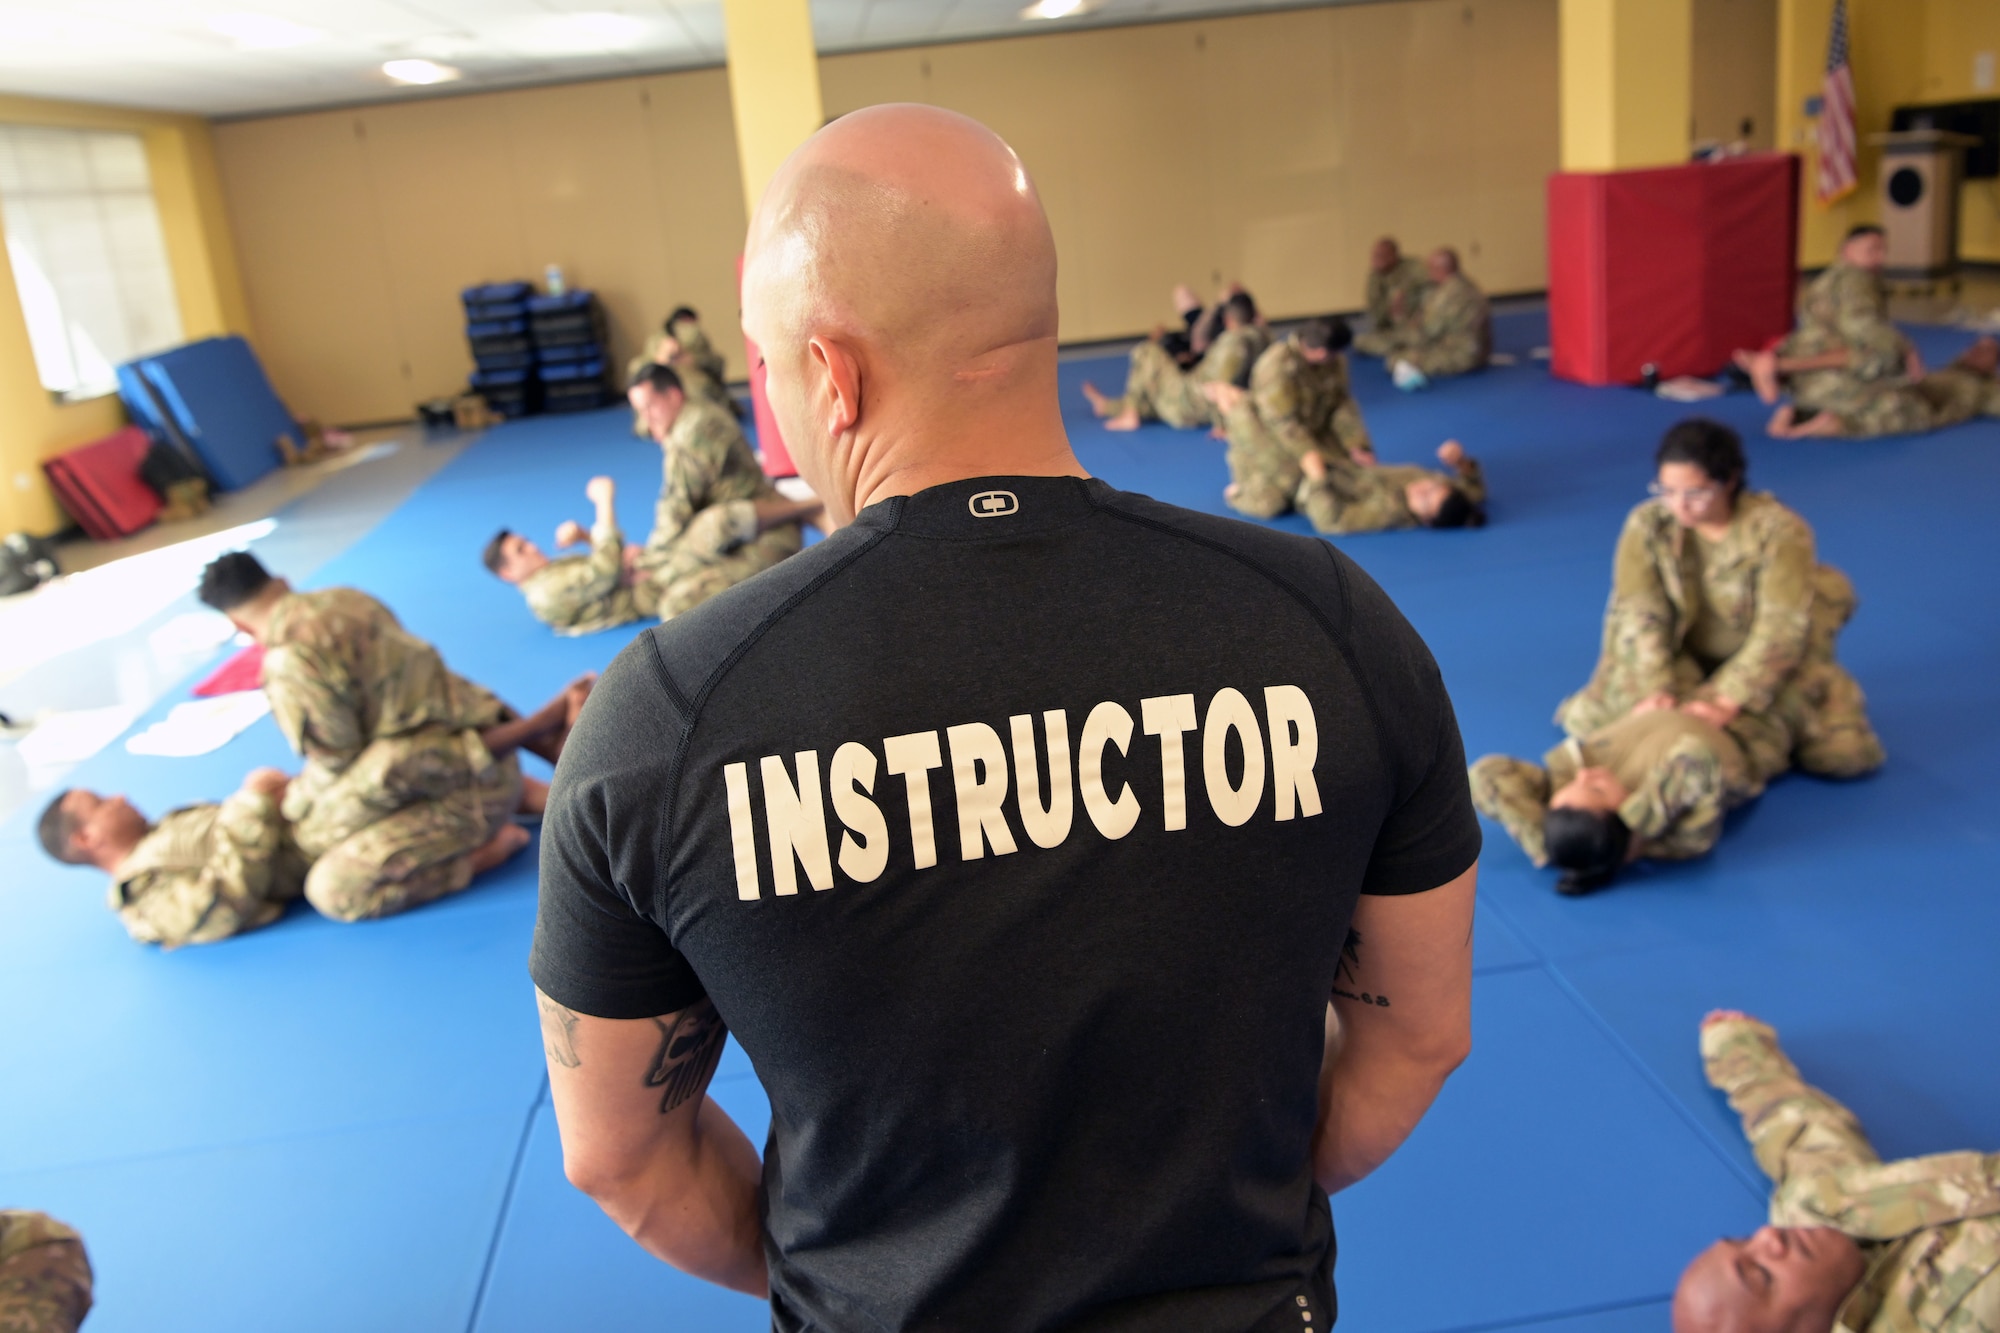 U.S. Air Force Master Sgt. Brian Cantu, an Air Force senior combatives instructor, with the 621st Contingency Response Squadron, Joint Base Mcguire-Dix-Lakehurst, oversees Airmen practice grappling techniques, March 16, 2022 at Muñiz Air National Guard Base, Puerto Rico. The 22 newly graduated Air Force Combatives instructors, all from different sections of the 156th Wing can pass down the knowledge they’ve acquired to other Airmen and assist in developing an always ready fighting force. “For us as instructors, just being able to see the Airmen grow in the aspect of having a mentality of ‘You know what? Size doesn't matter, as long as I use proper technique’ we’re good to go,” said Cantu. (U.S. Air National Guard photo by Master Sgt. Rafael D. Rosa)